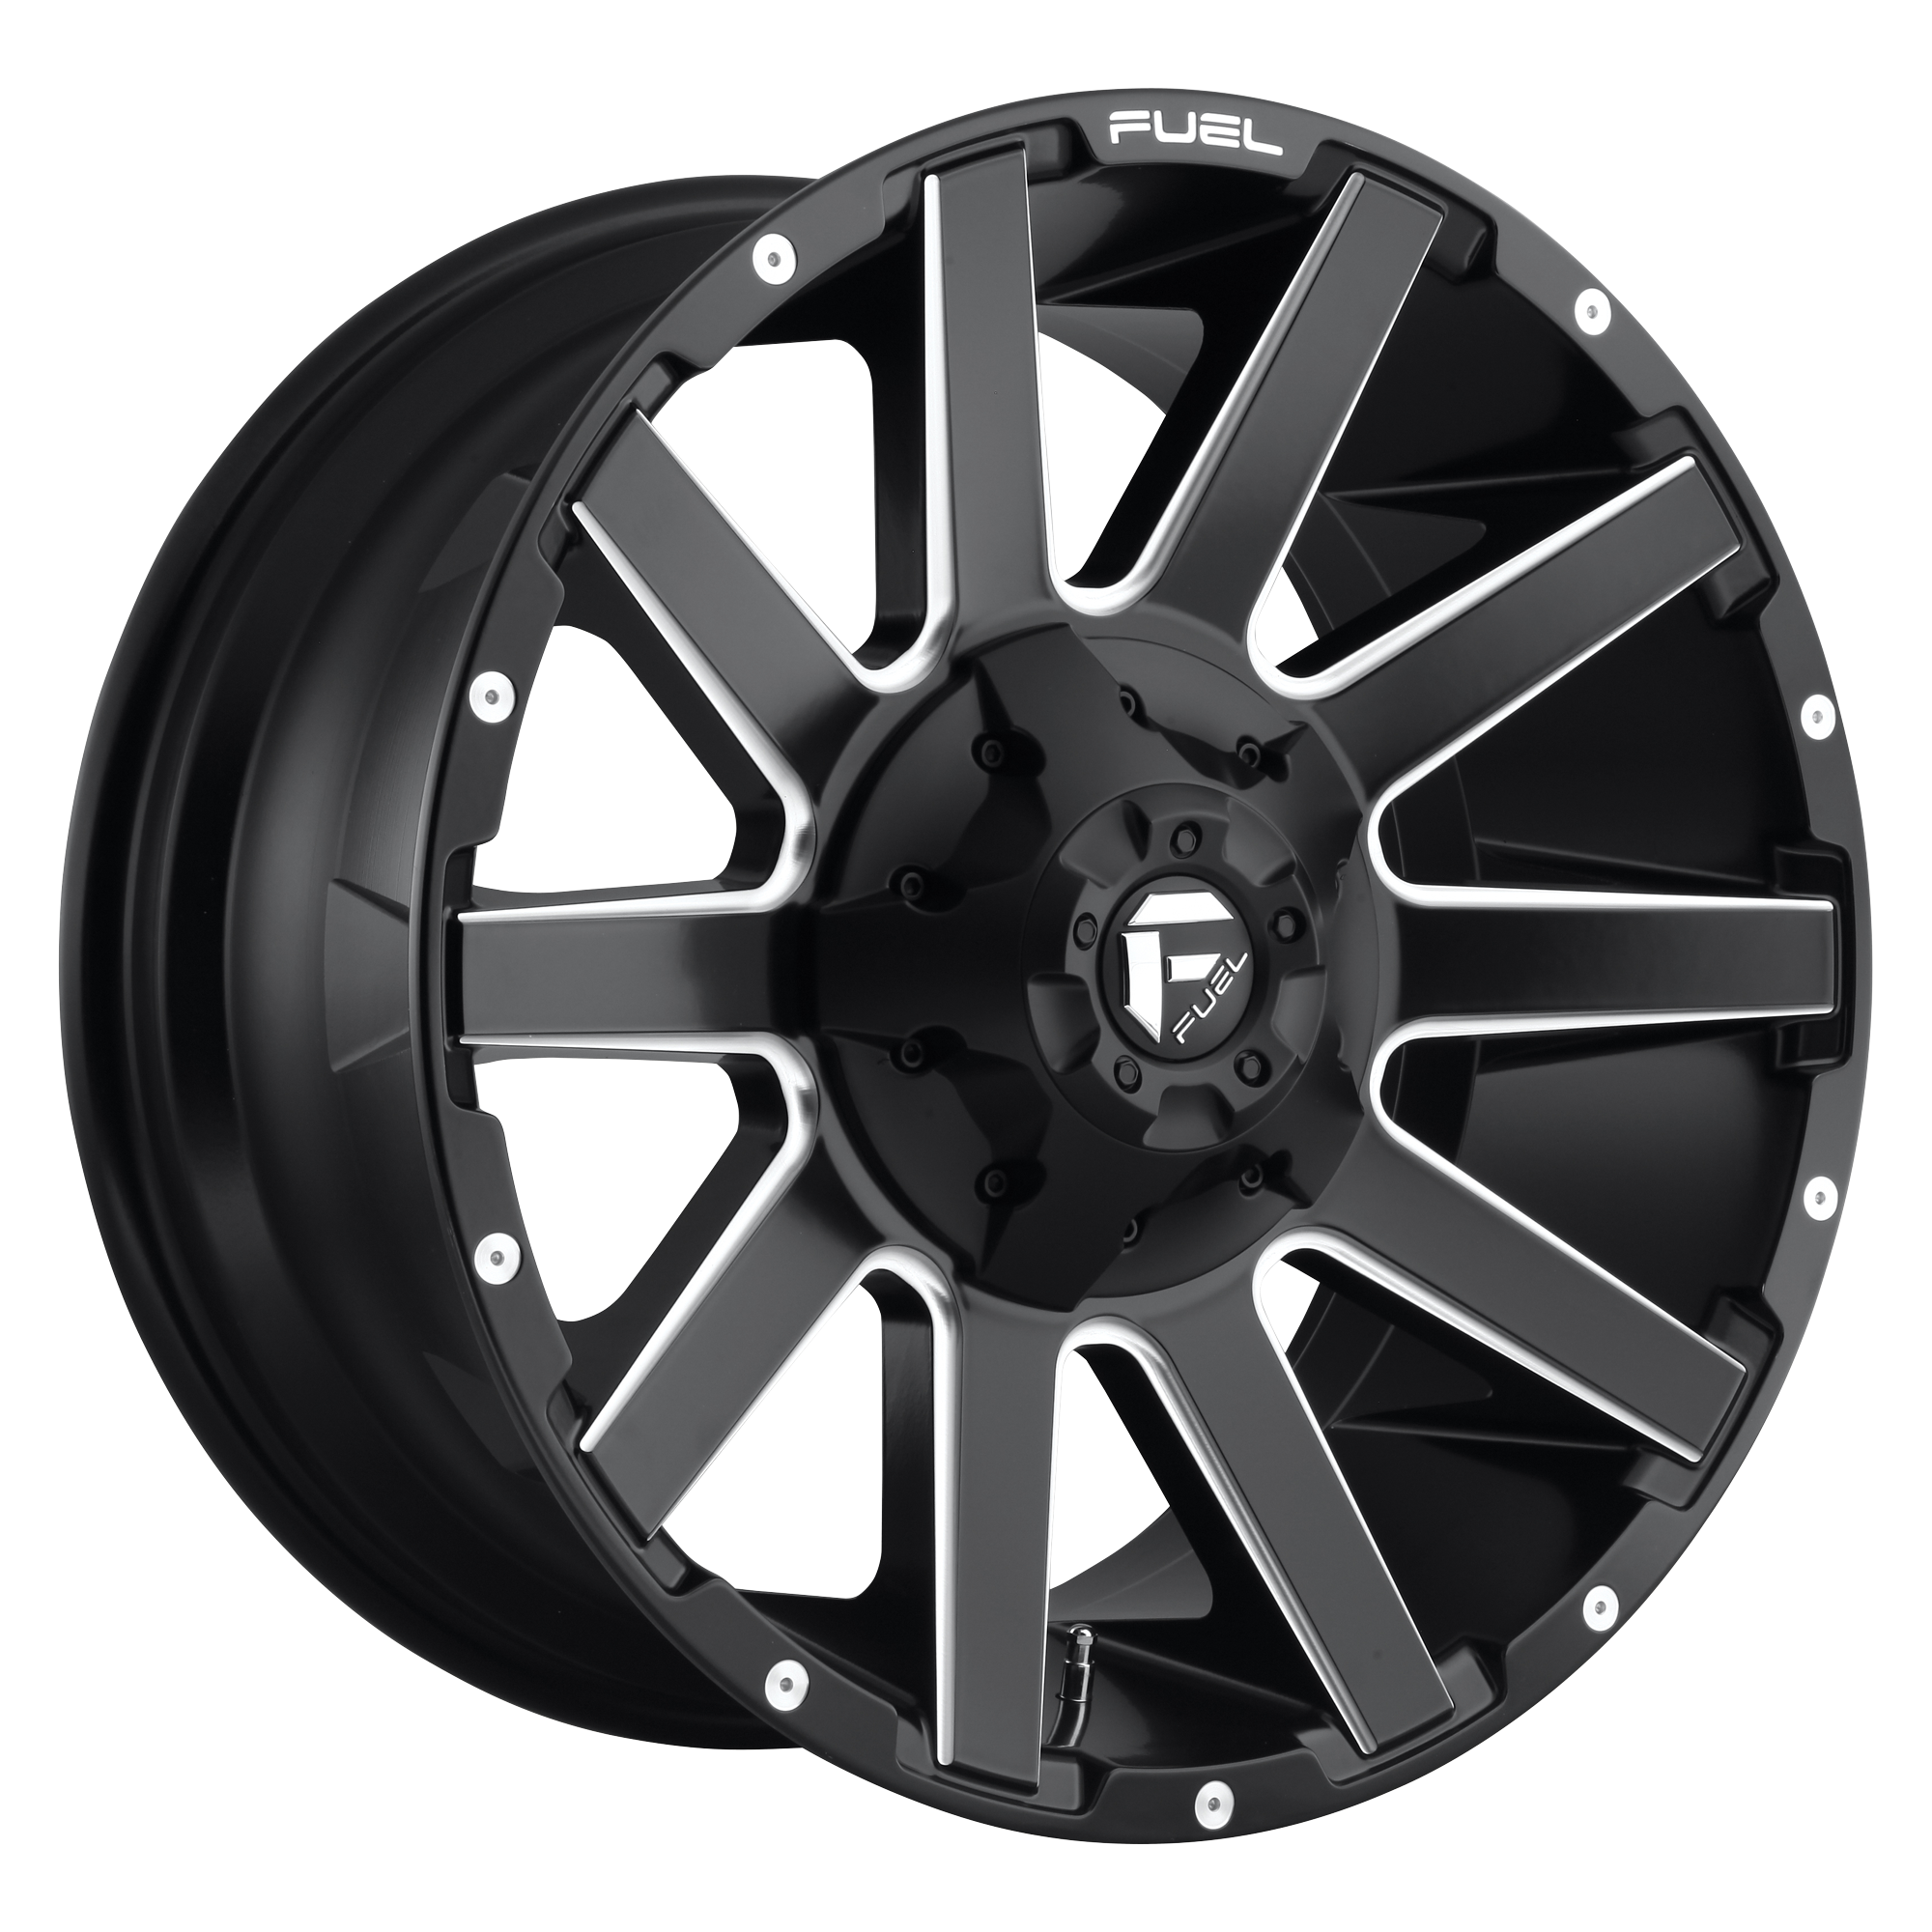 CONTRA 20x9 8x180.00 MATTE BLACK MILLED (20 mm) - Tires and Engine Performance